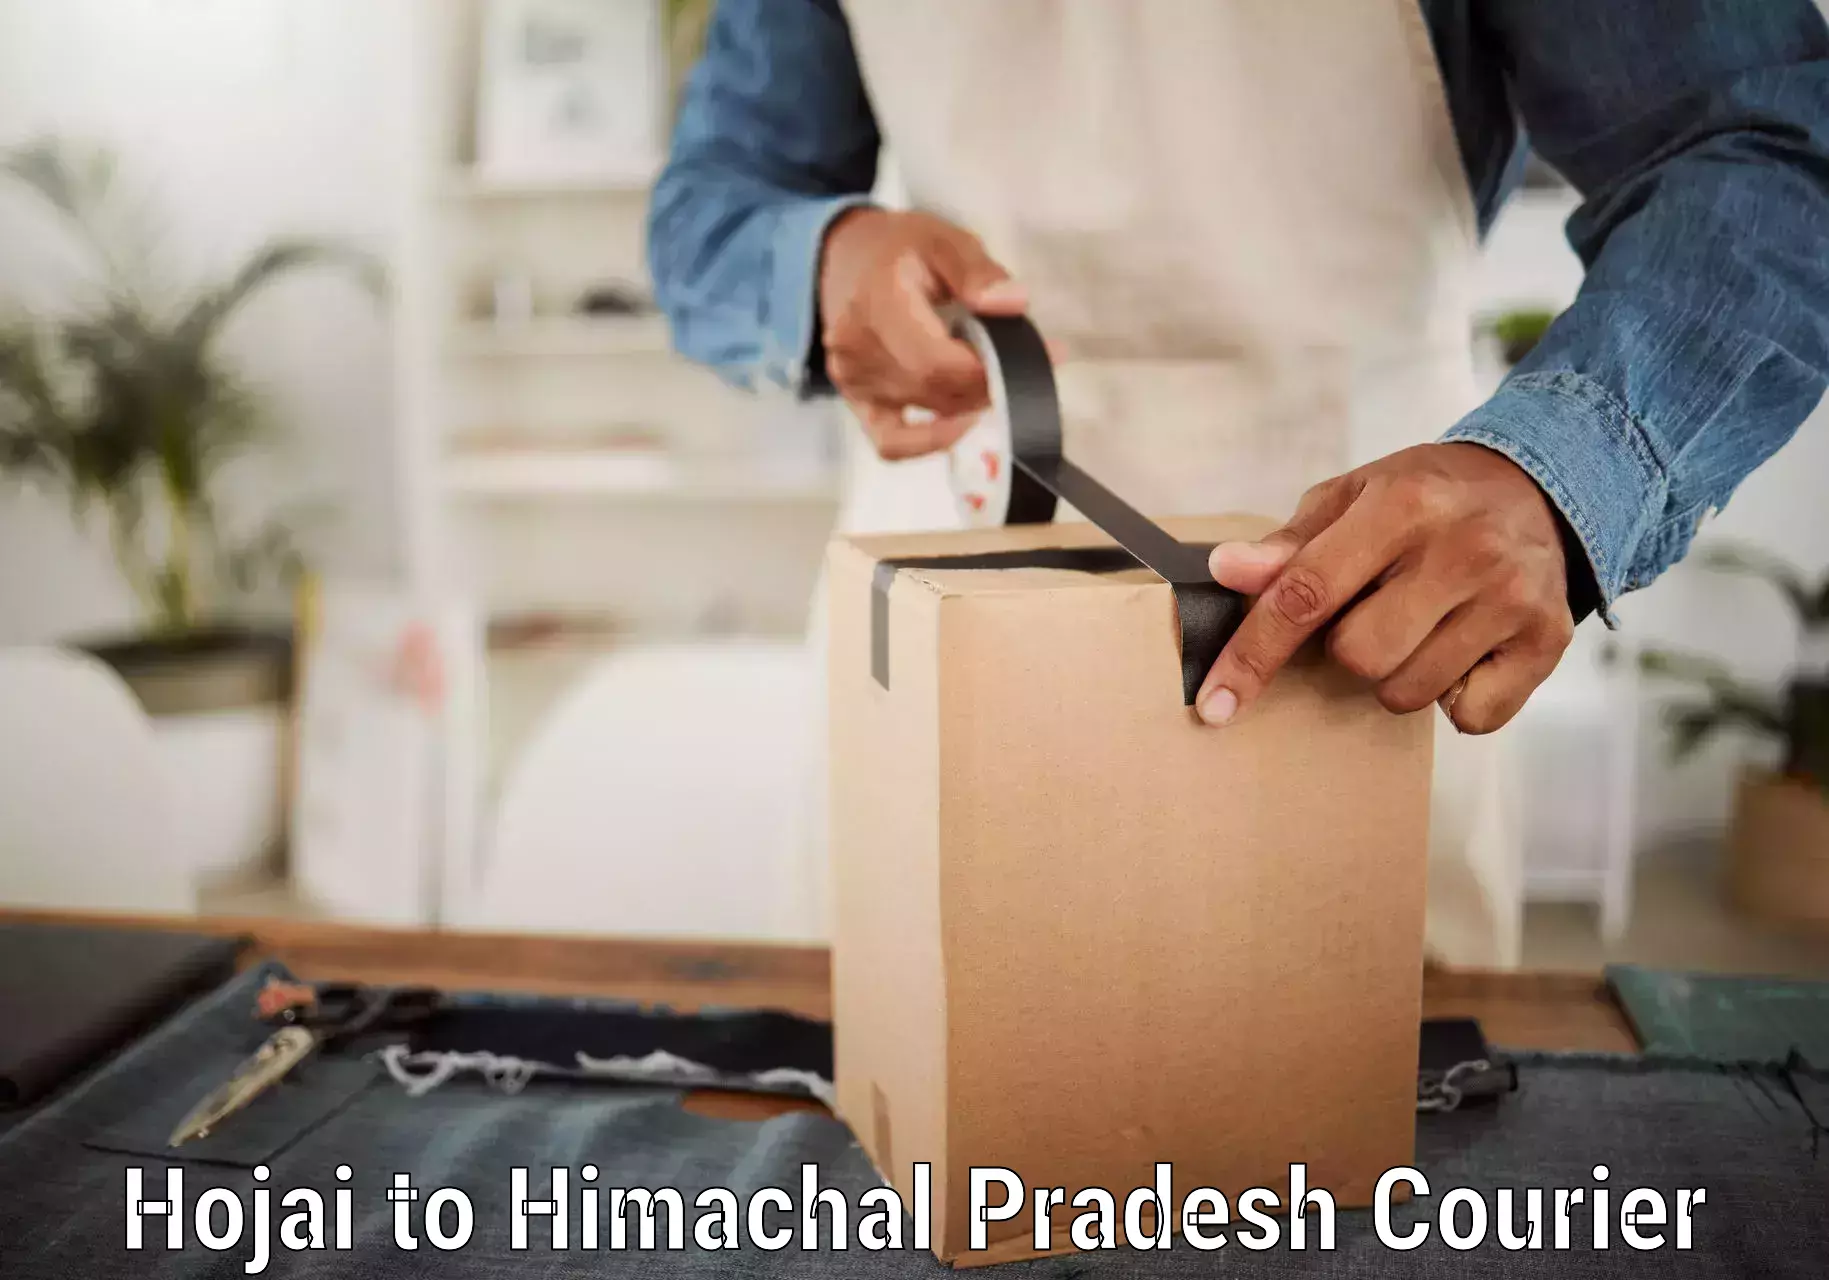 Automated parcel services Hojai to Himachal Pradesh